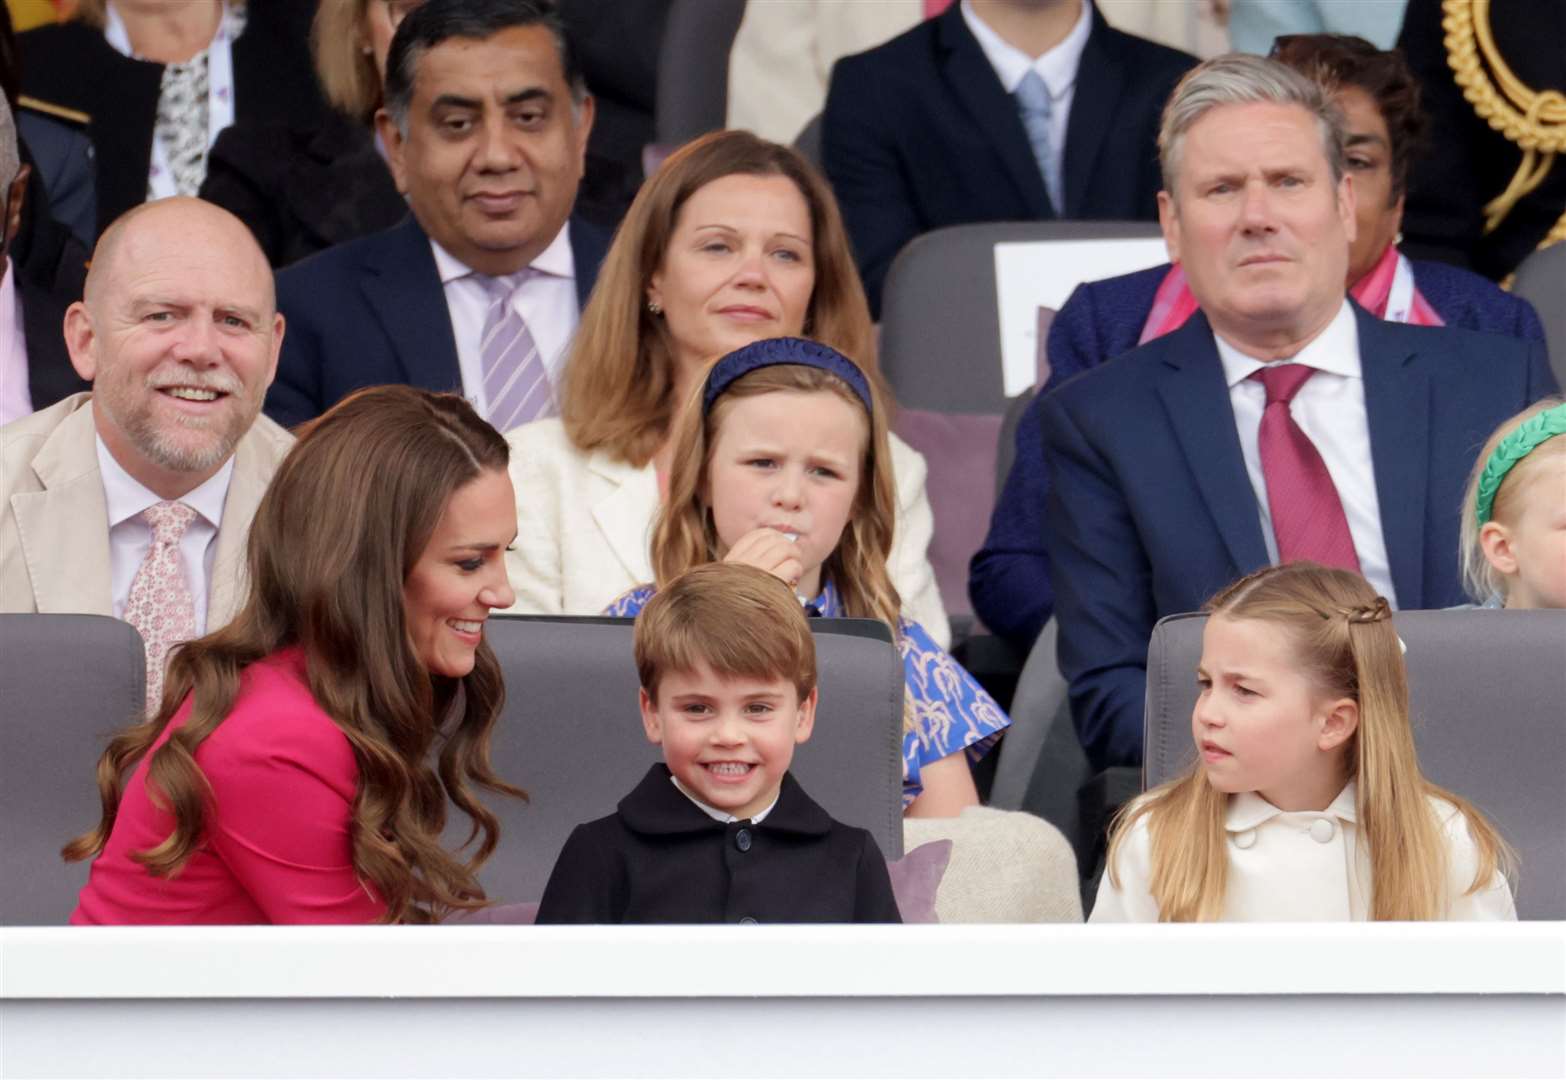 The Duchess of Cambridge with Prince Louis, Princess Charlotte in the front row of the royal box. Chris Jackson/PA